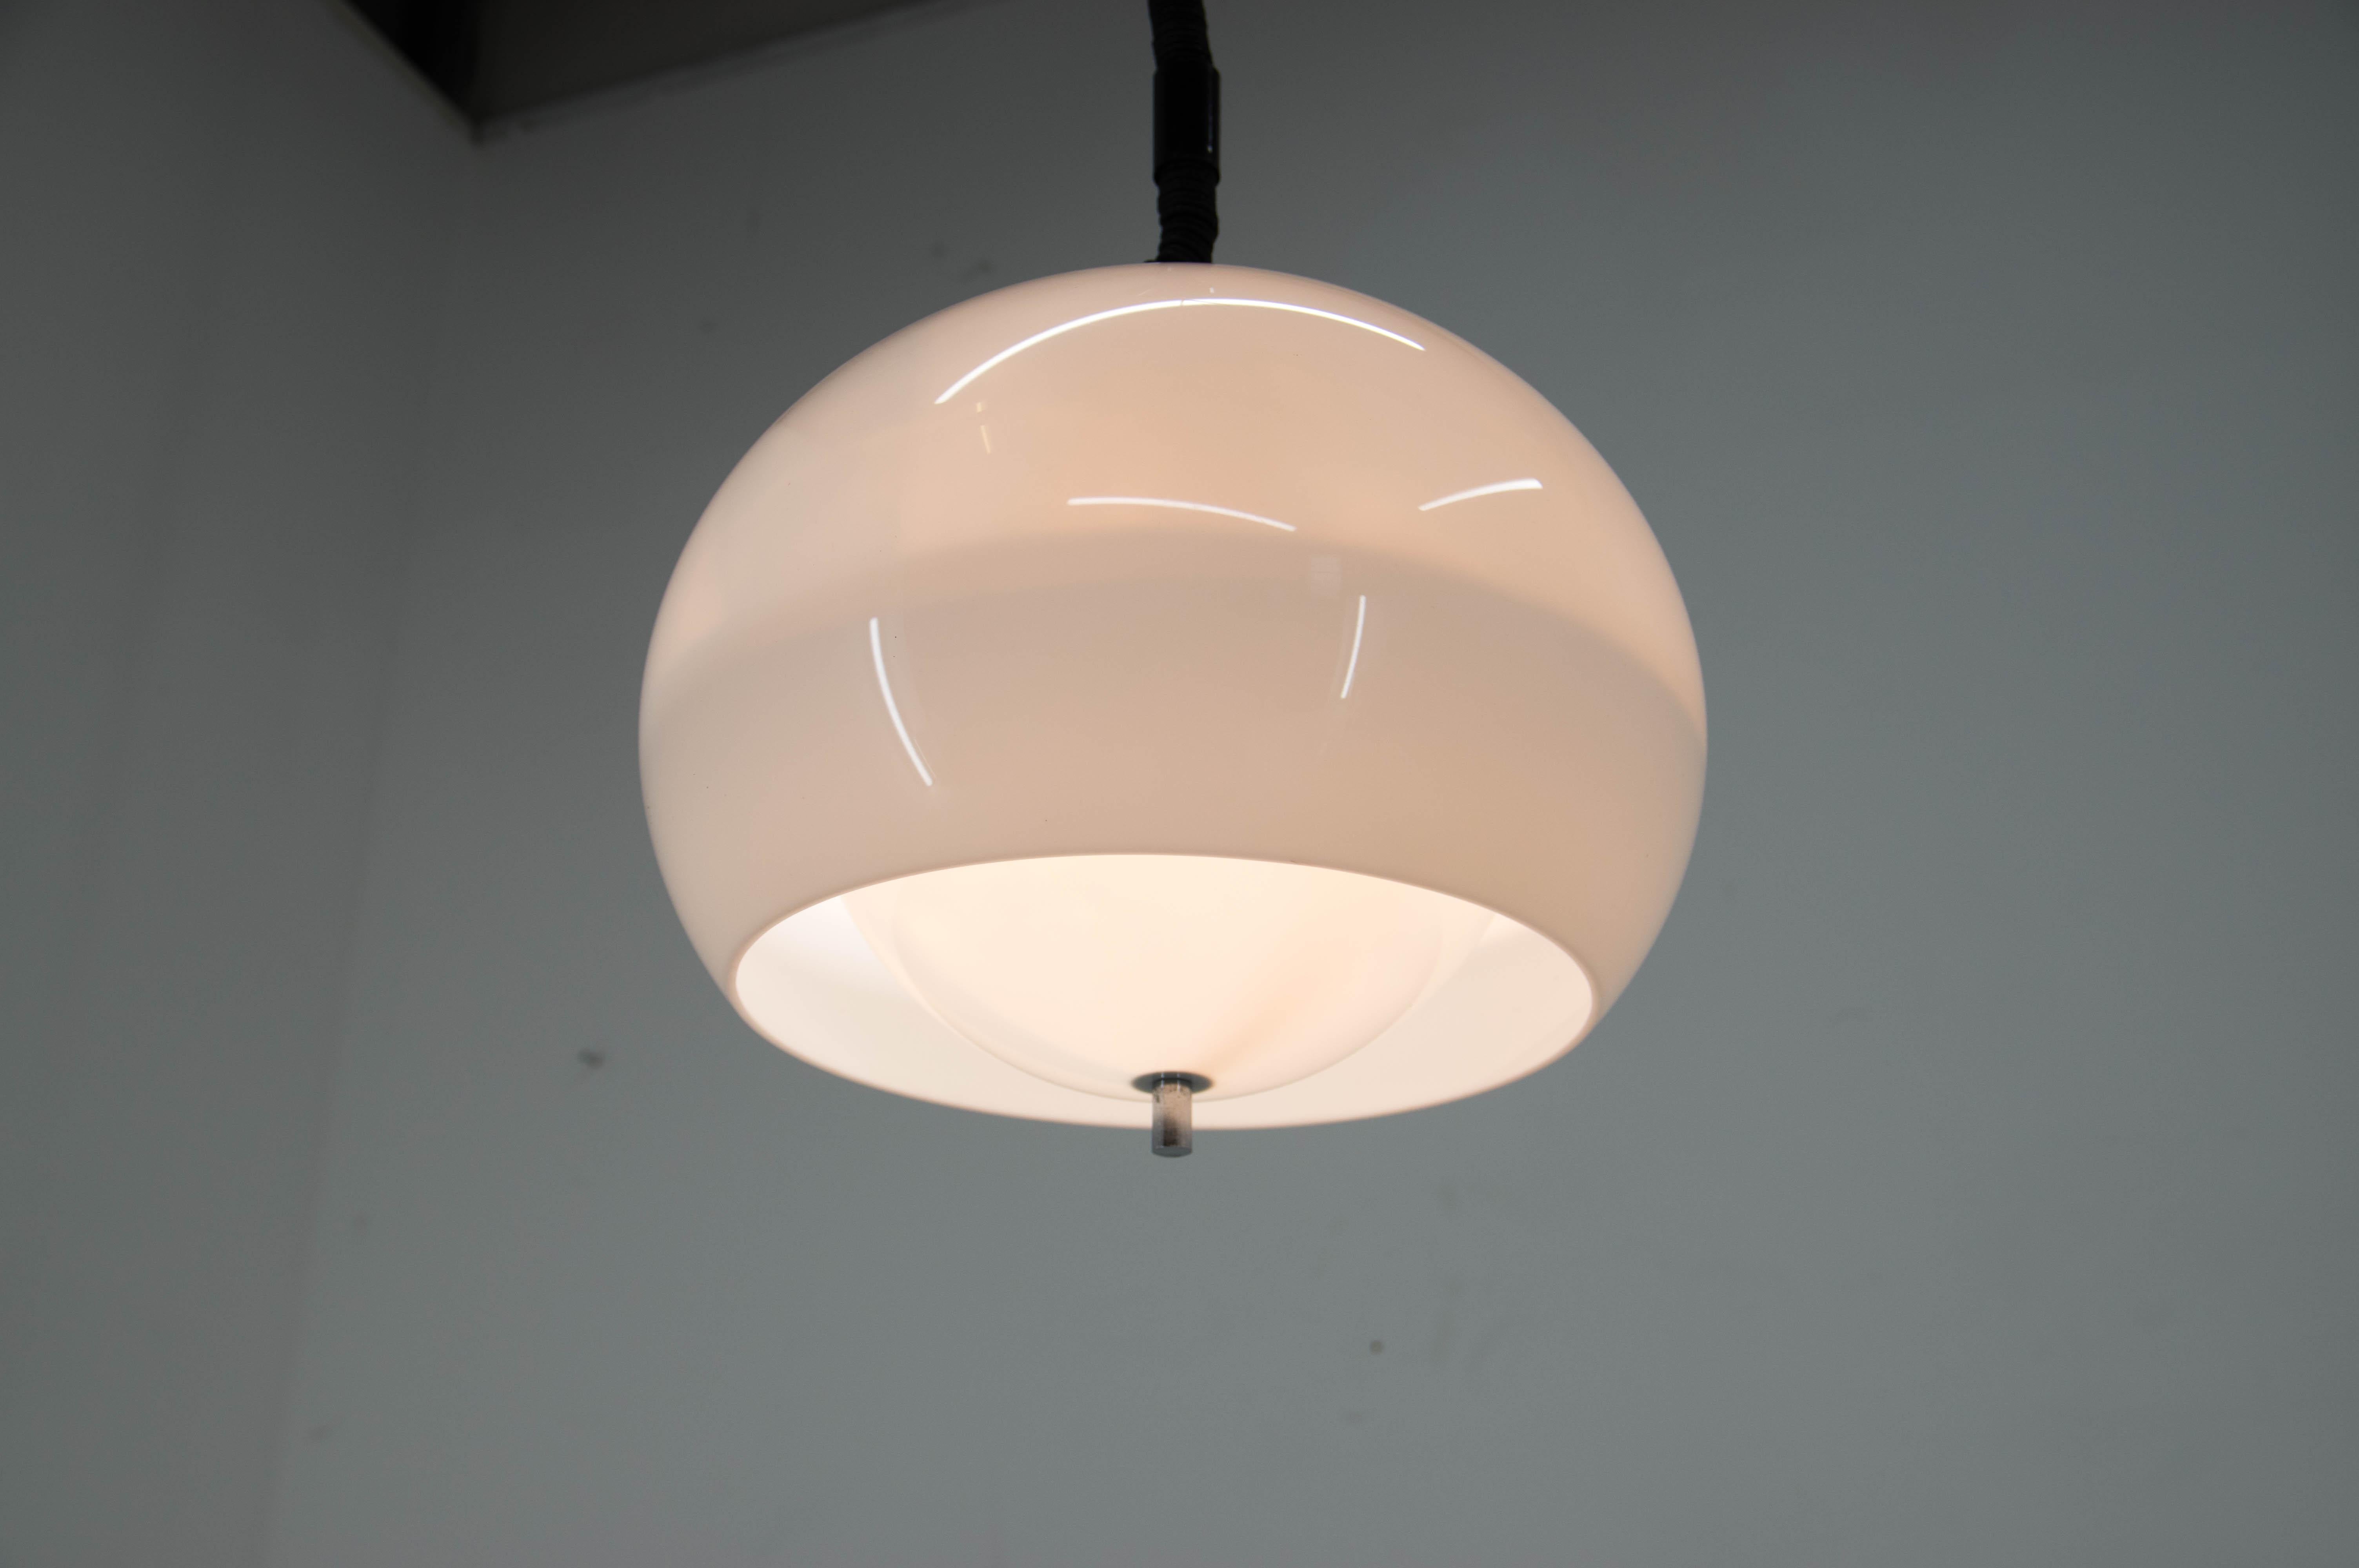 White pendant by Meblo, Italy
Adjustable height: 80cm - 129cm
1x40W, E25-E27 bulb
US wiring compatible.
  